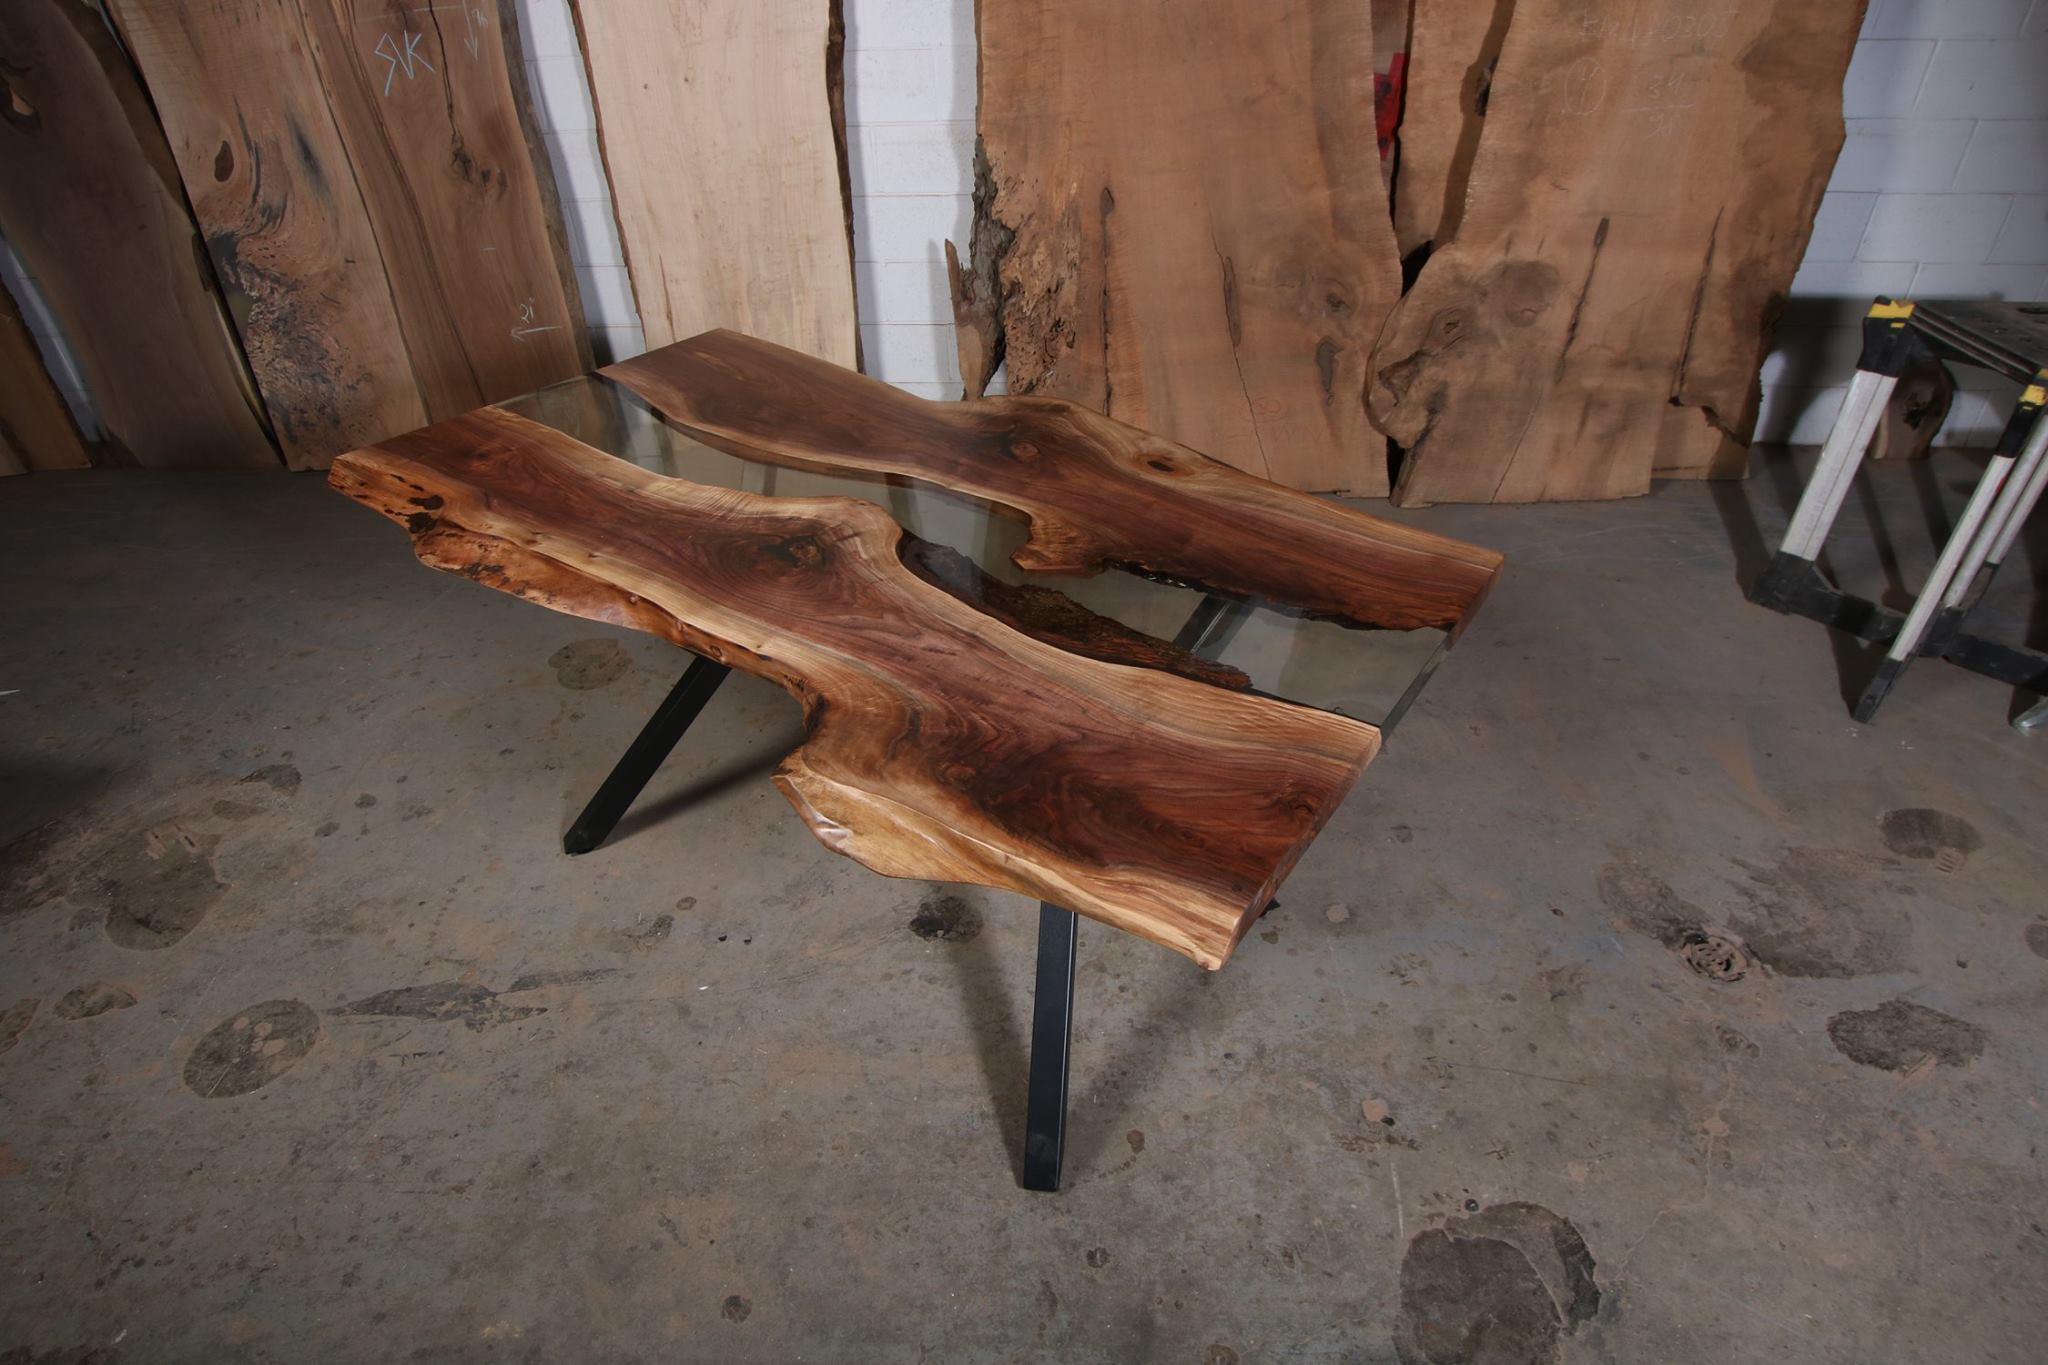 Walnut Kitchen River Table with K shaped Legs